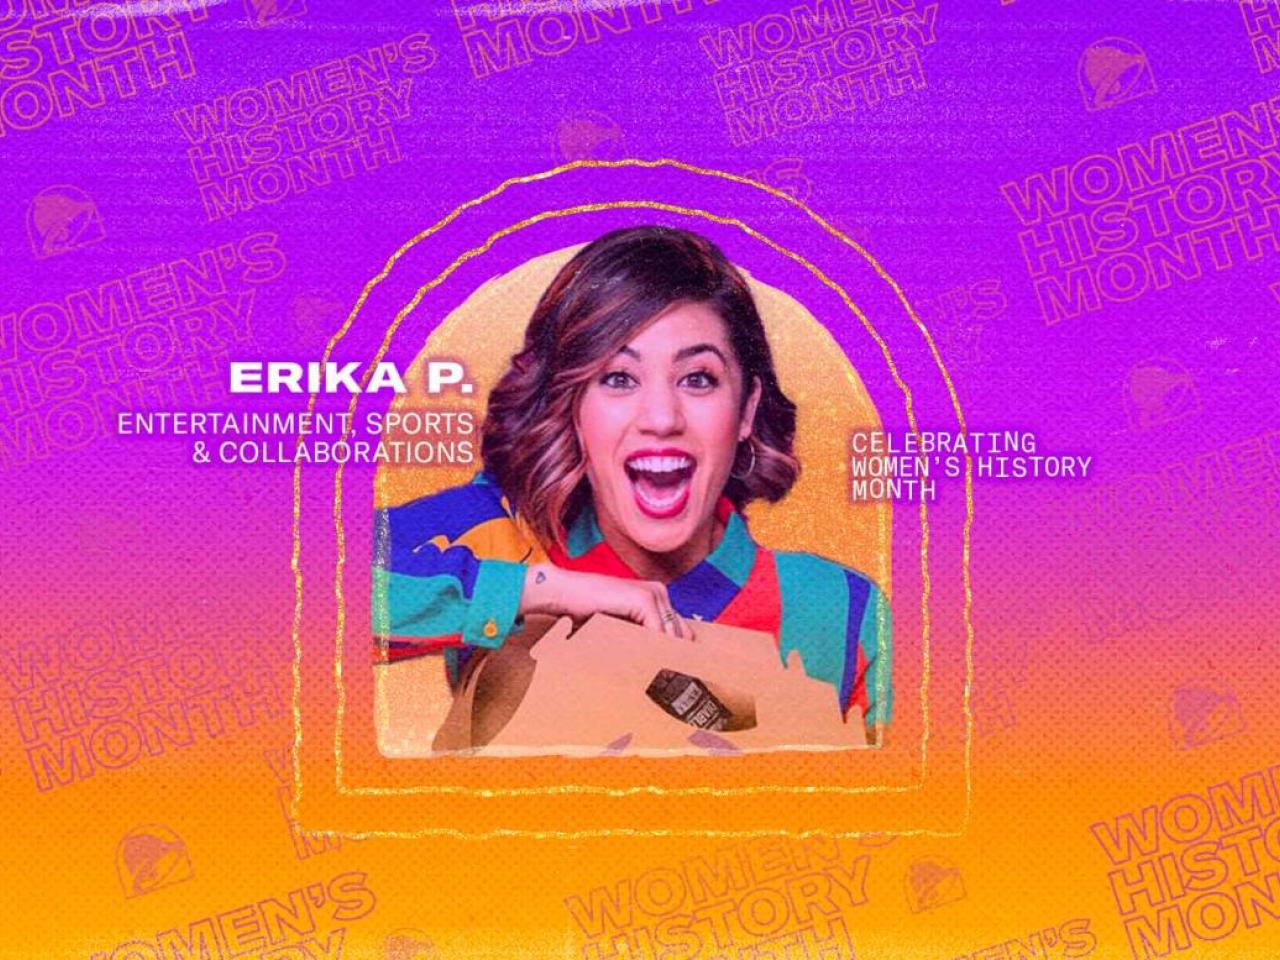 Erika P. Entertainment, Sports & Collaborations. Profile of Erika with a big smile opening a box. A colorful gradient background with Taco bell and Women's history month logos.